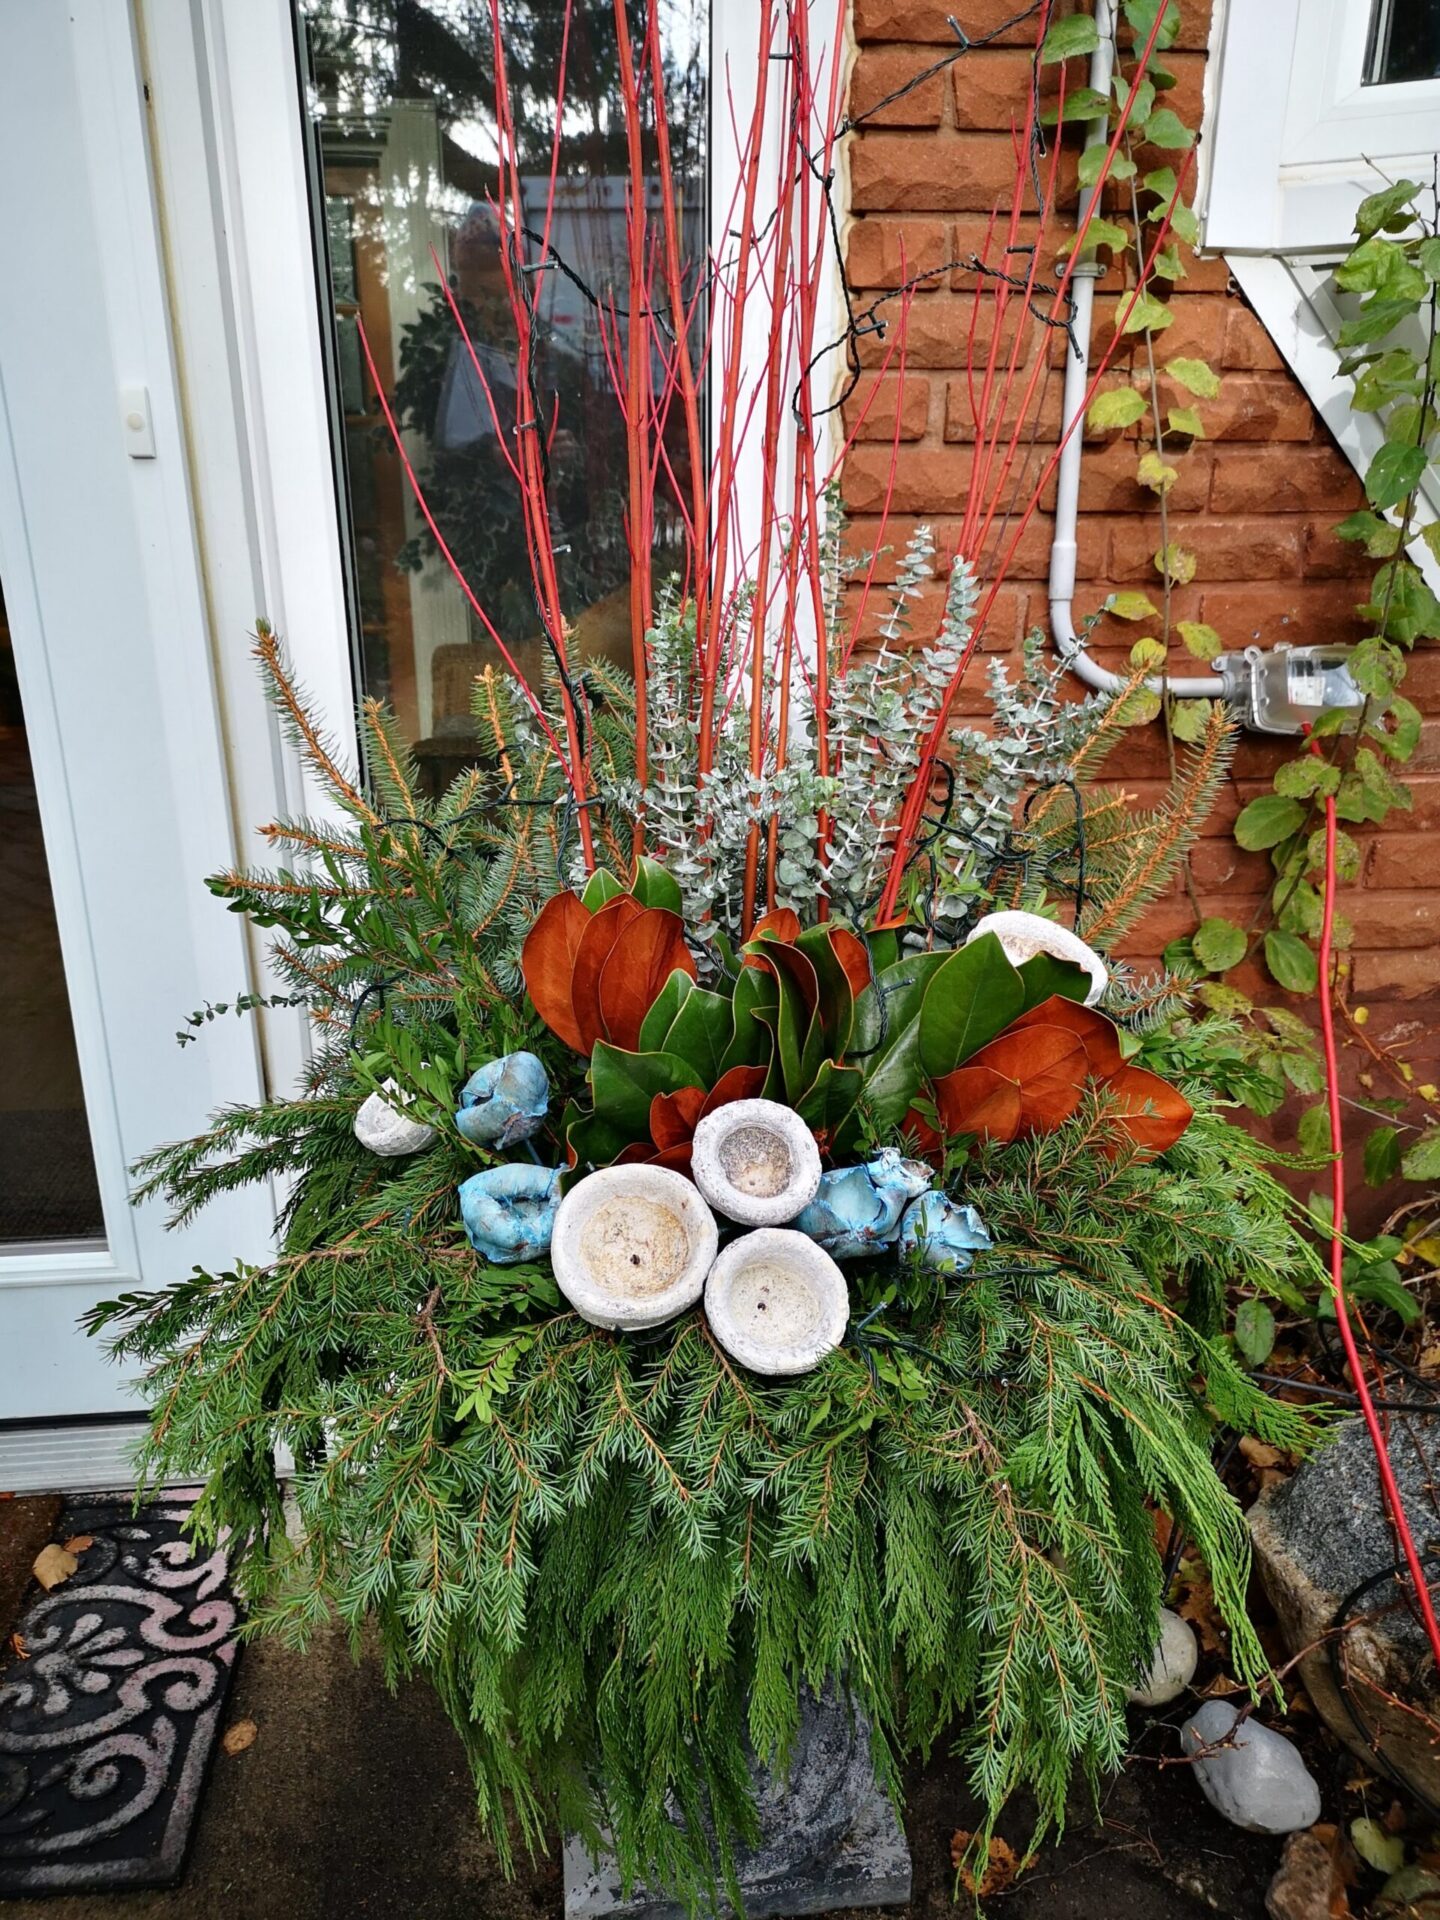 An outdoor floral arrangement featuring red branches, green foliage, blue ornaments, and white mushroom decorations in front of a house entrance.